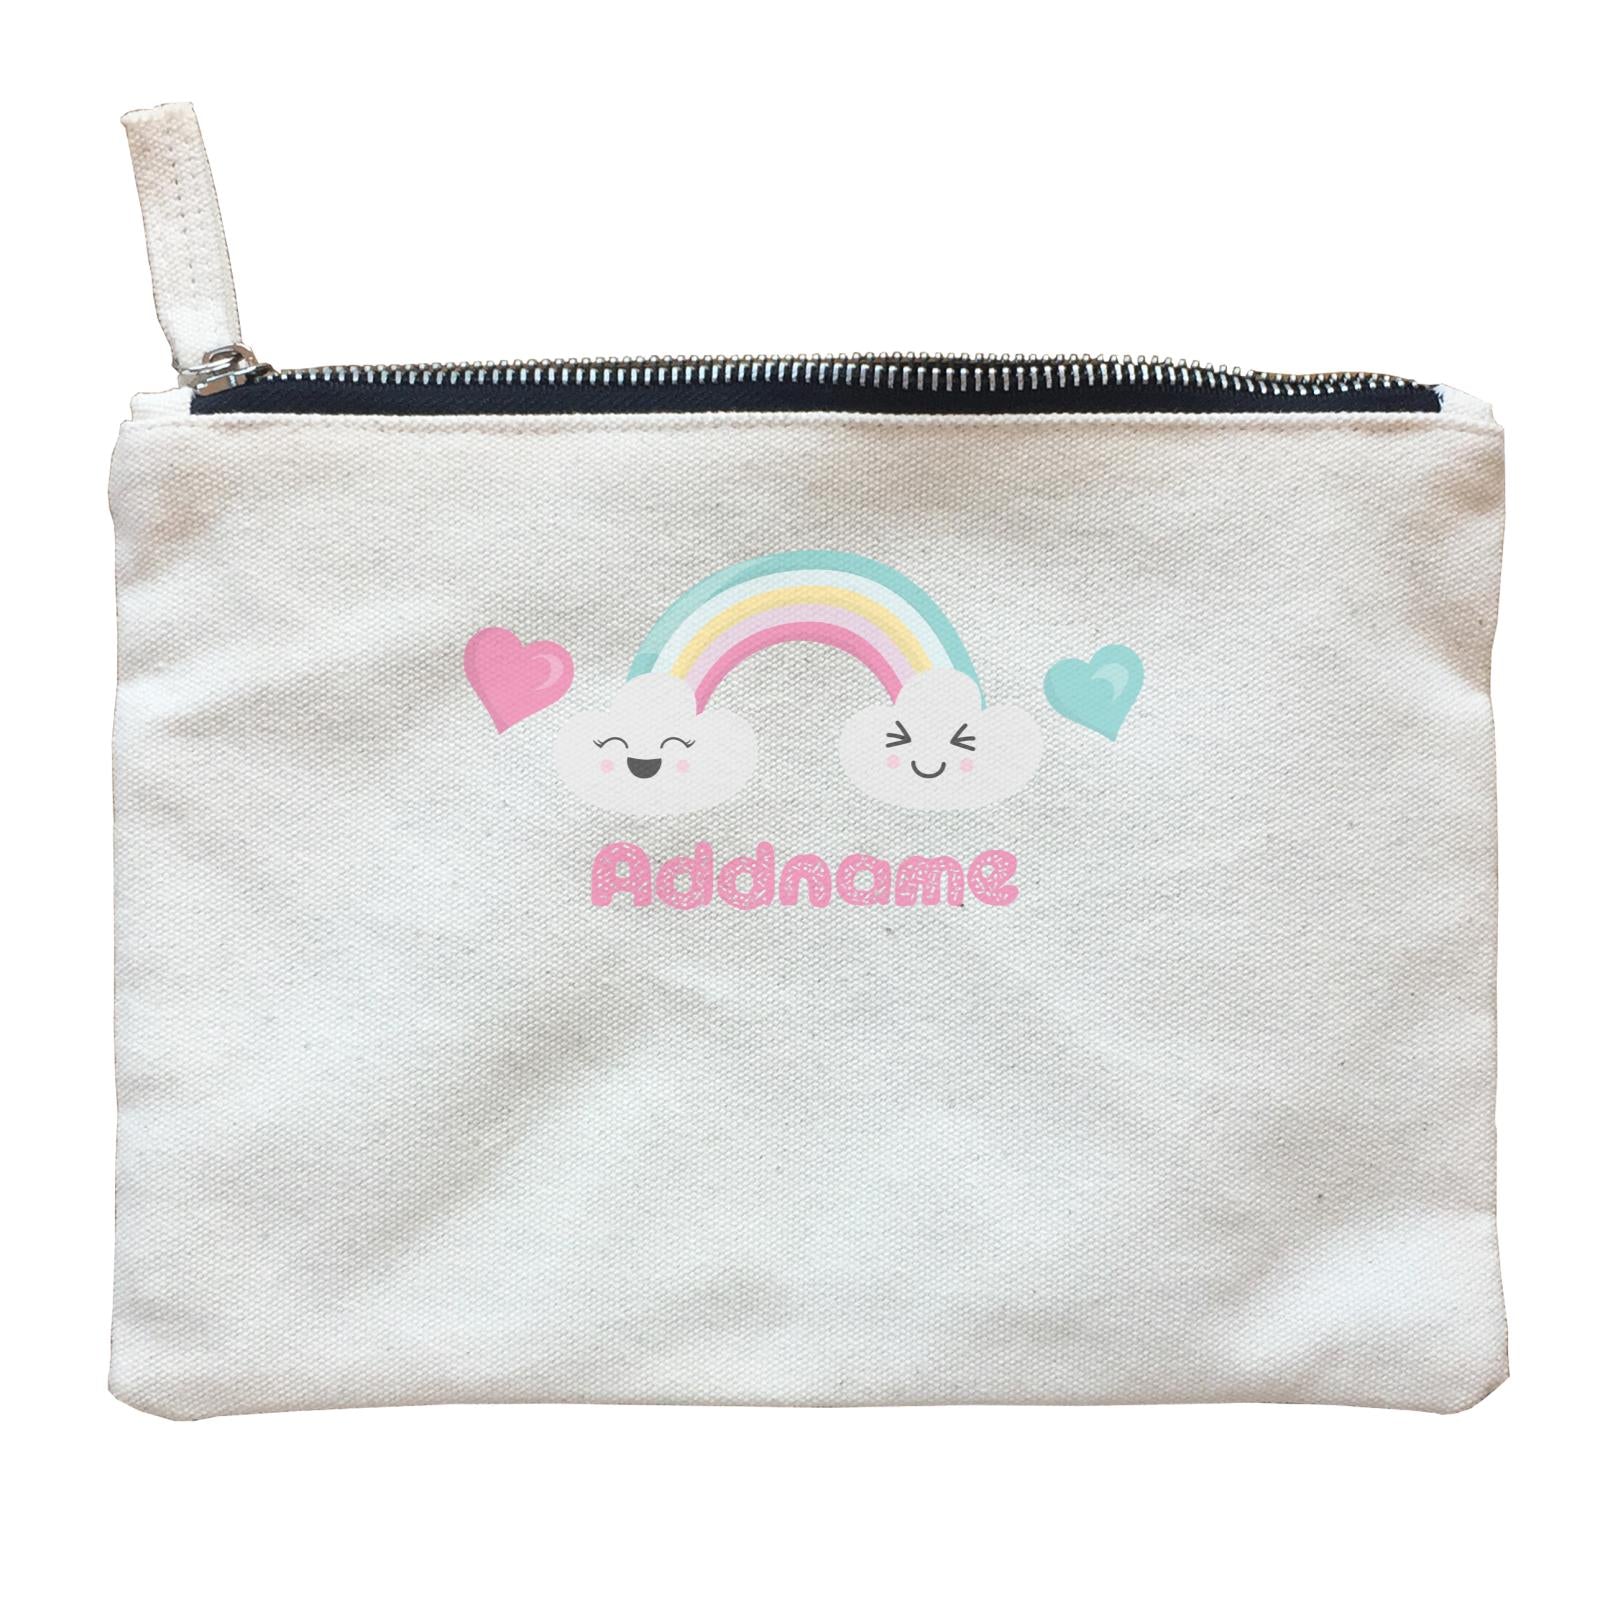 Magical Sweets Rainbow with Clouds Addname Zipper Pouch